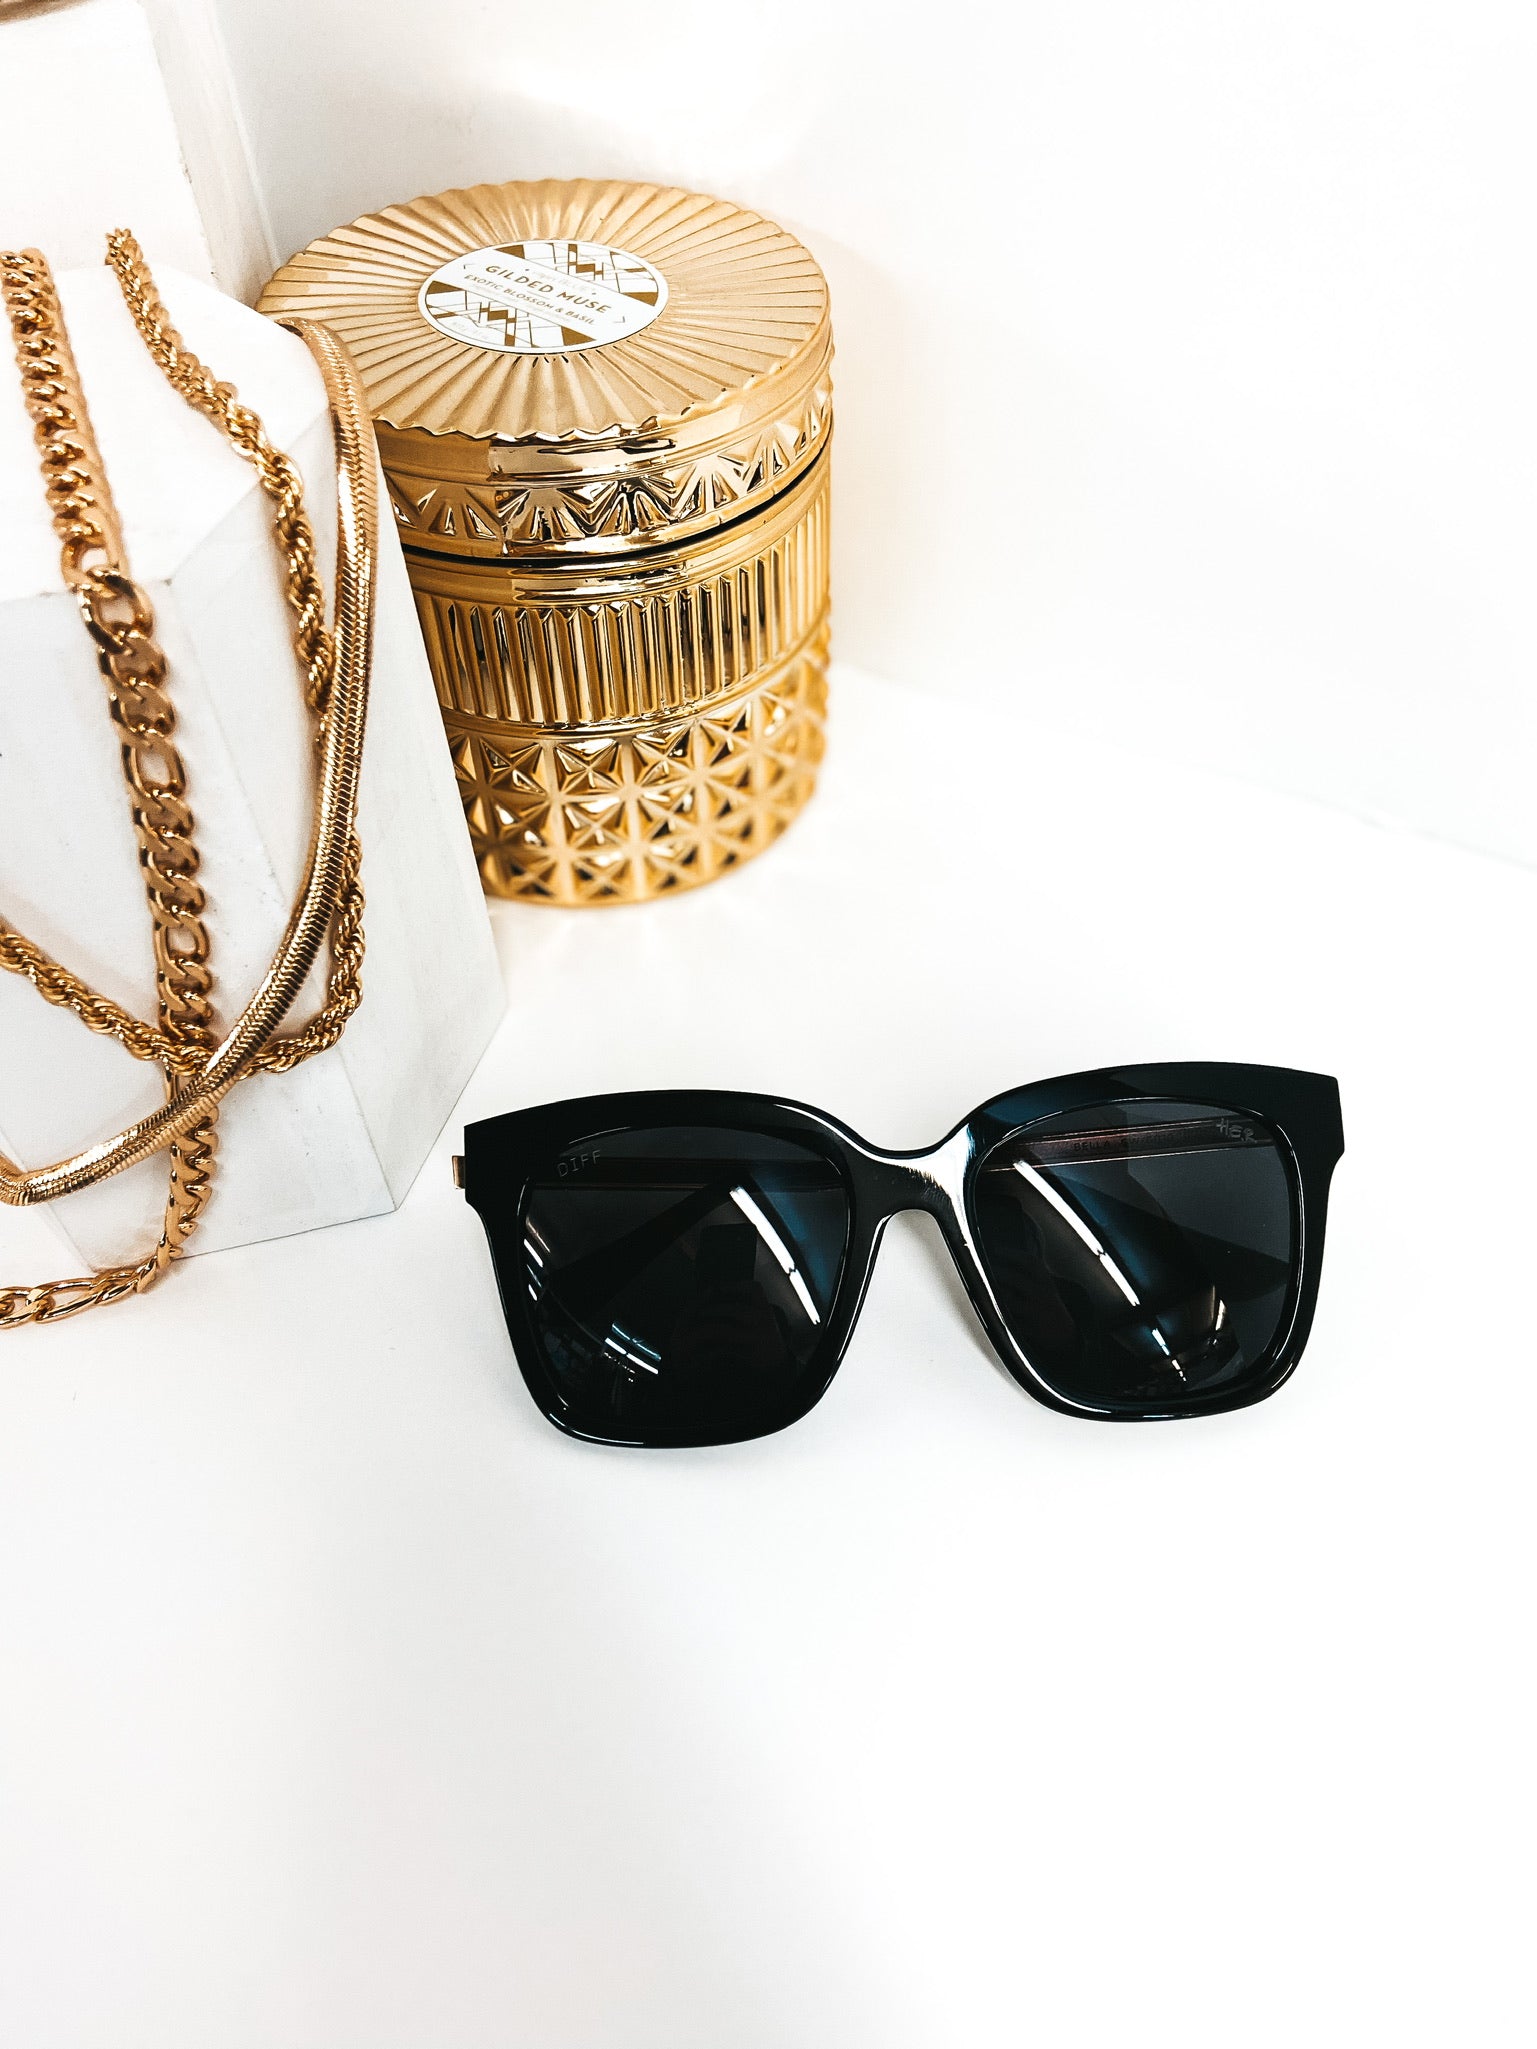 DIFF x H.E.R. | Bella Black Lens Sunglasses in Black and Gold - Giddy Up Glamour Boutique